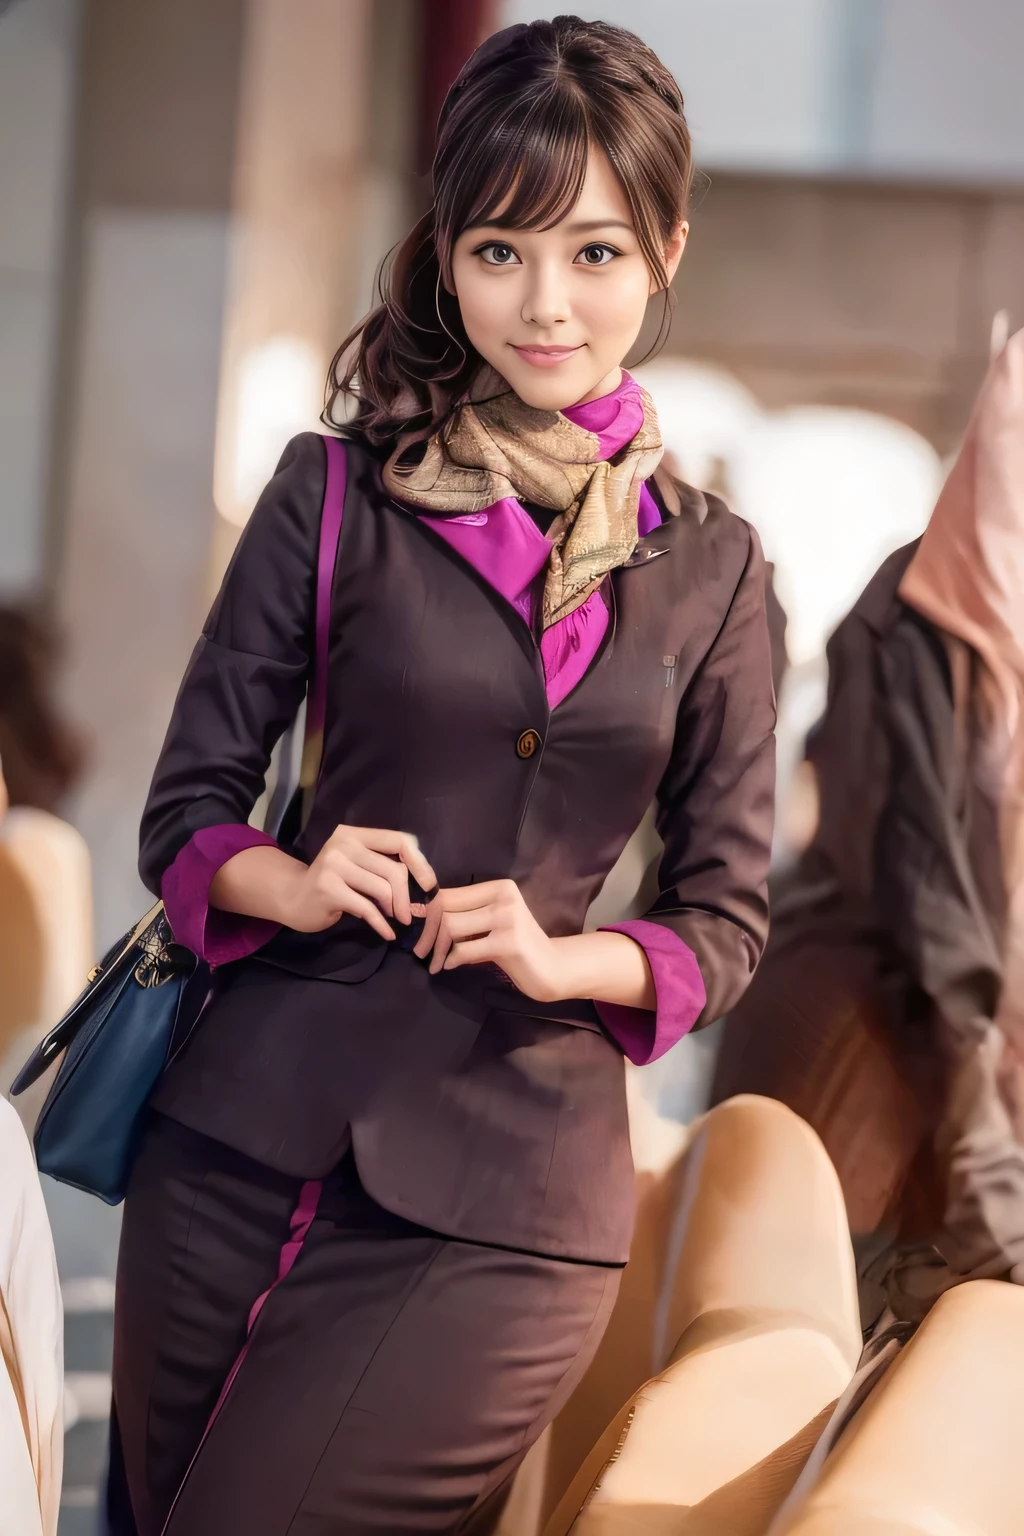 (masterpiece:1.2、highest quality:1.2)、32K HDR、High resolution、(alone、1 girl、Slim figure)、（A realistic reproduction of the ETIHAD Airways Cabincrew Uniform）、 (On board, Professional Lighting)、A proper woman, Beautiful Face,、（Long sleeve ETIHAD Airways Cabincrew Uniform）、（ETIHAD Airways Cabincrew Uniform skirt with purple stripe on the front）、（scarf on chest）、Big Breasts、（Long Hair Up、Hair Bun）、Dark brown hair、Long Shot、（（Great hands：2.0））、（（Harmonious body proportions：1.5））、（（Normal limbs：2.0））、（（Normal finger：2.0））、（（Delicate eyes：2.0））、（（Normal eyes：2.0））)、Beautiful standing posture、smile